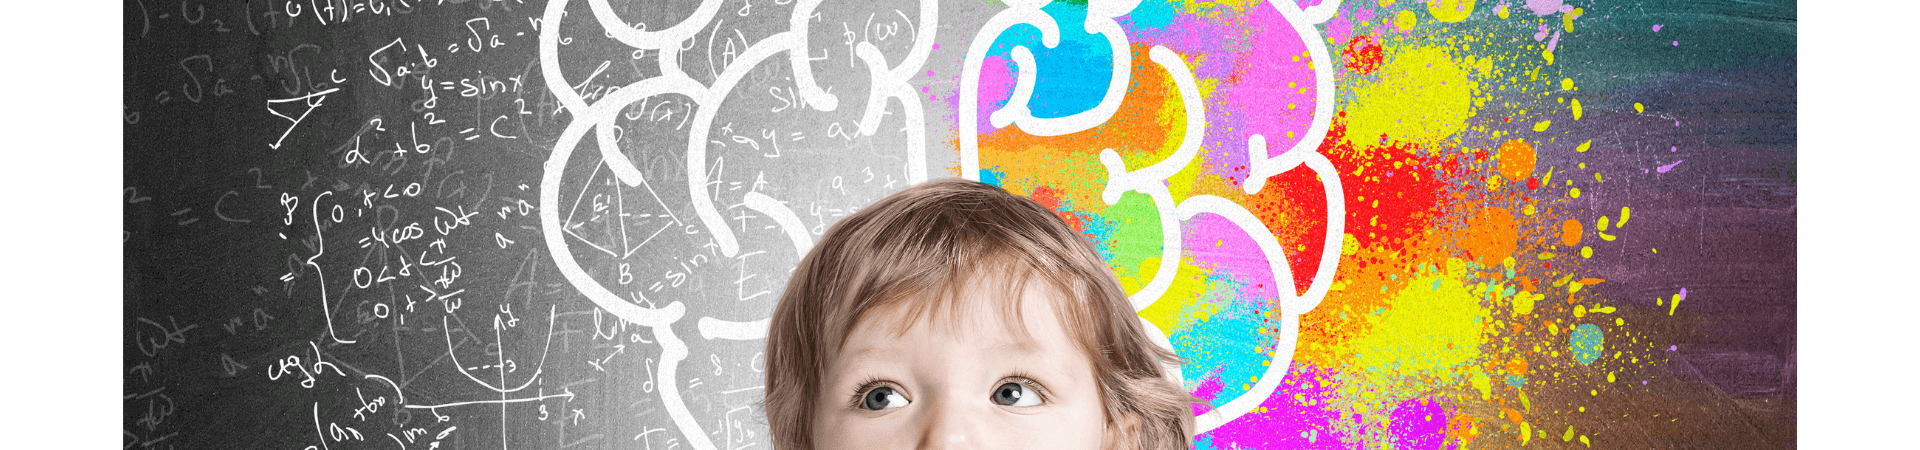 Children Stages of Development or How To Understand Your Child